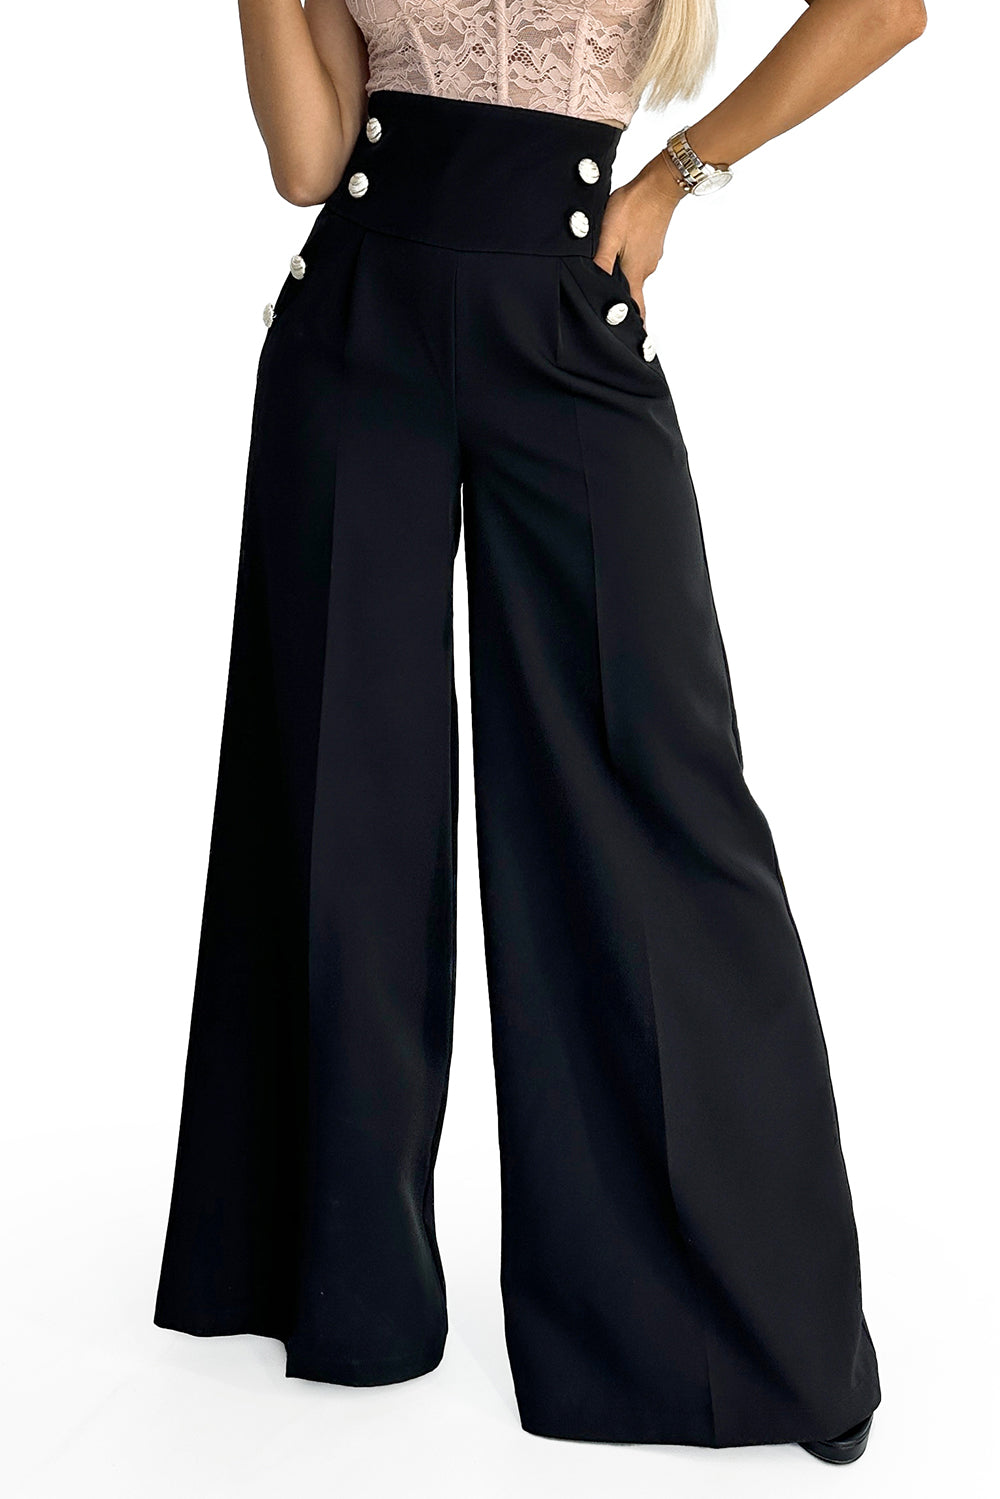 18341-8-496-1 Elegant wide pants with high waist and golden buttons - black-8